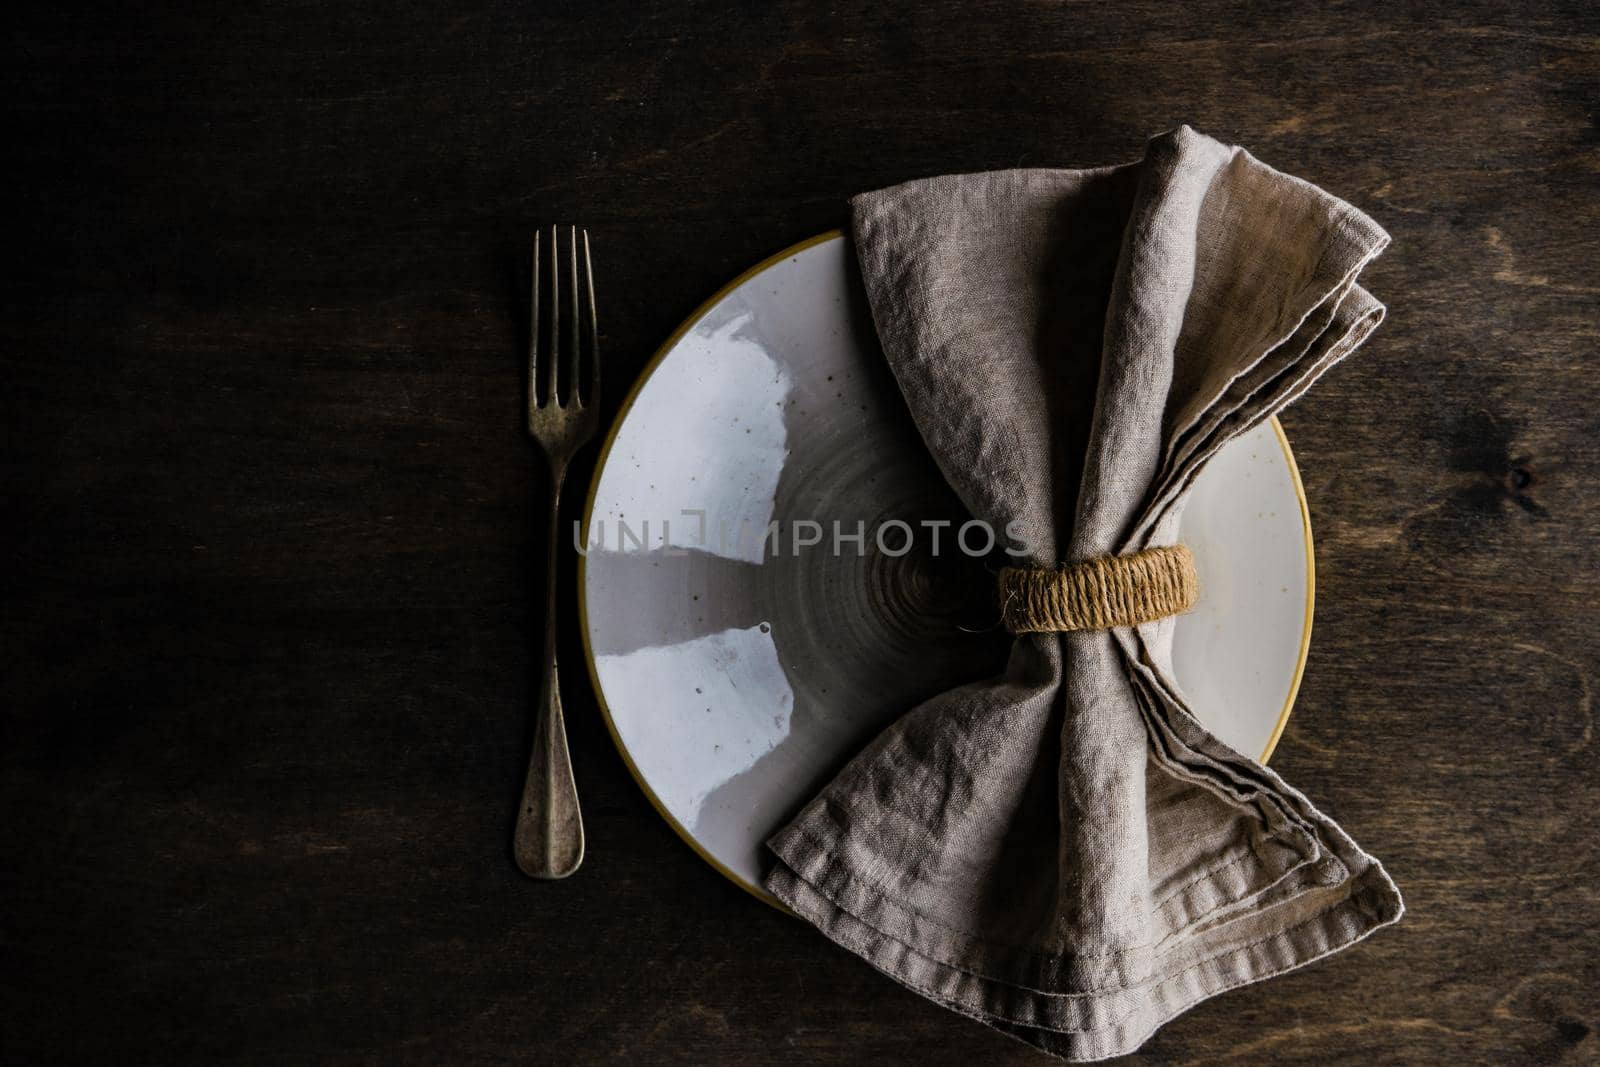 Vintage dinnerware on wooden table by Elet